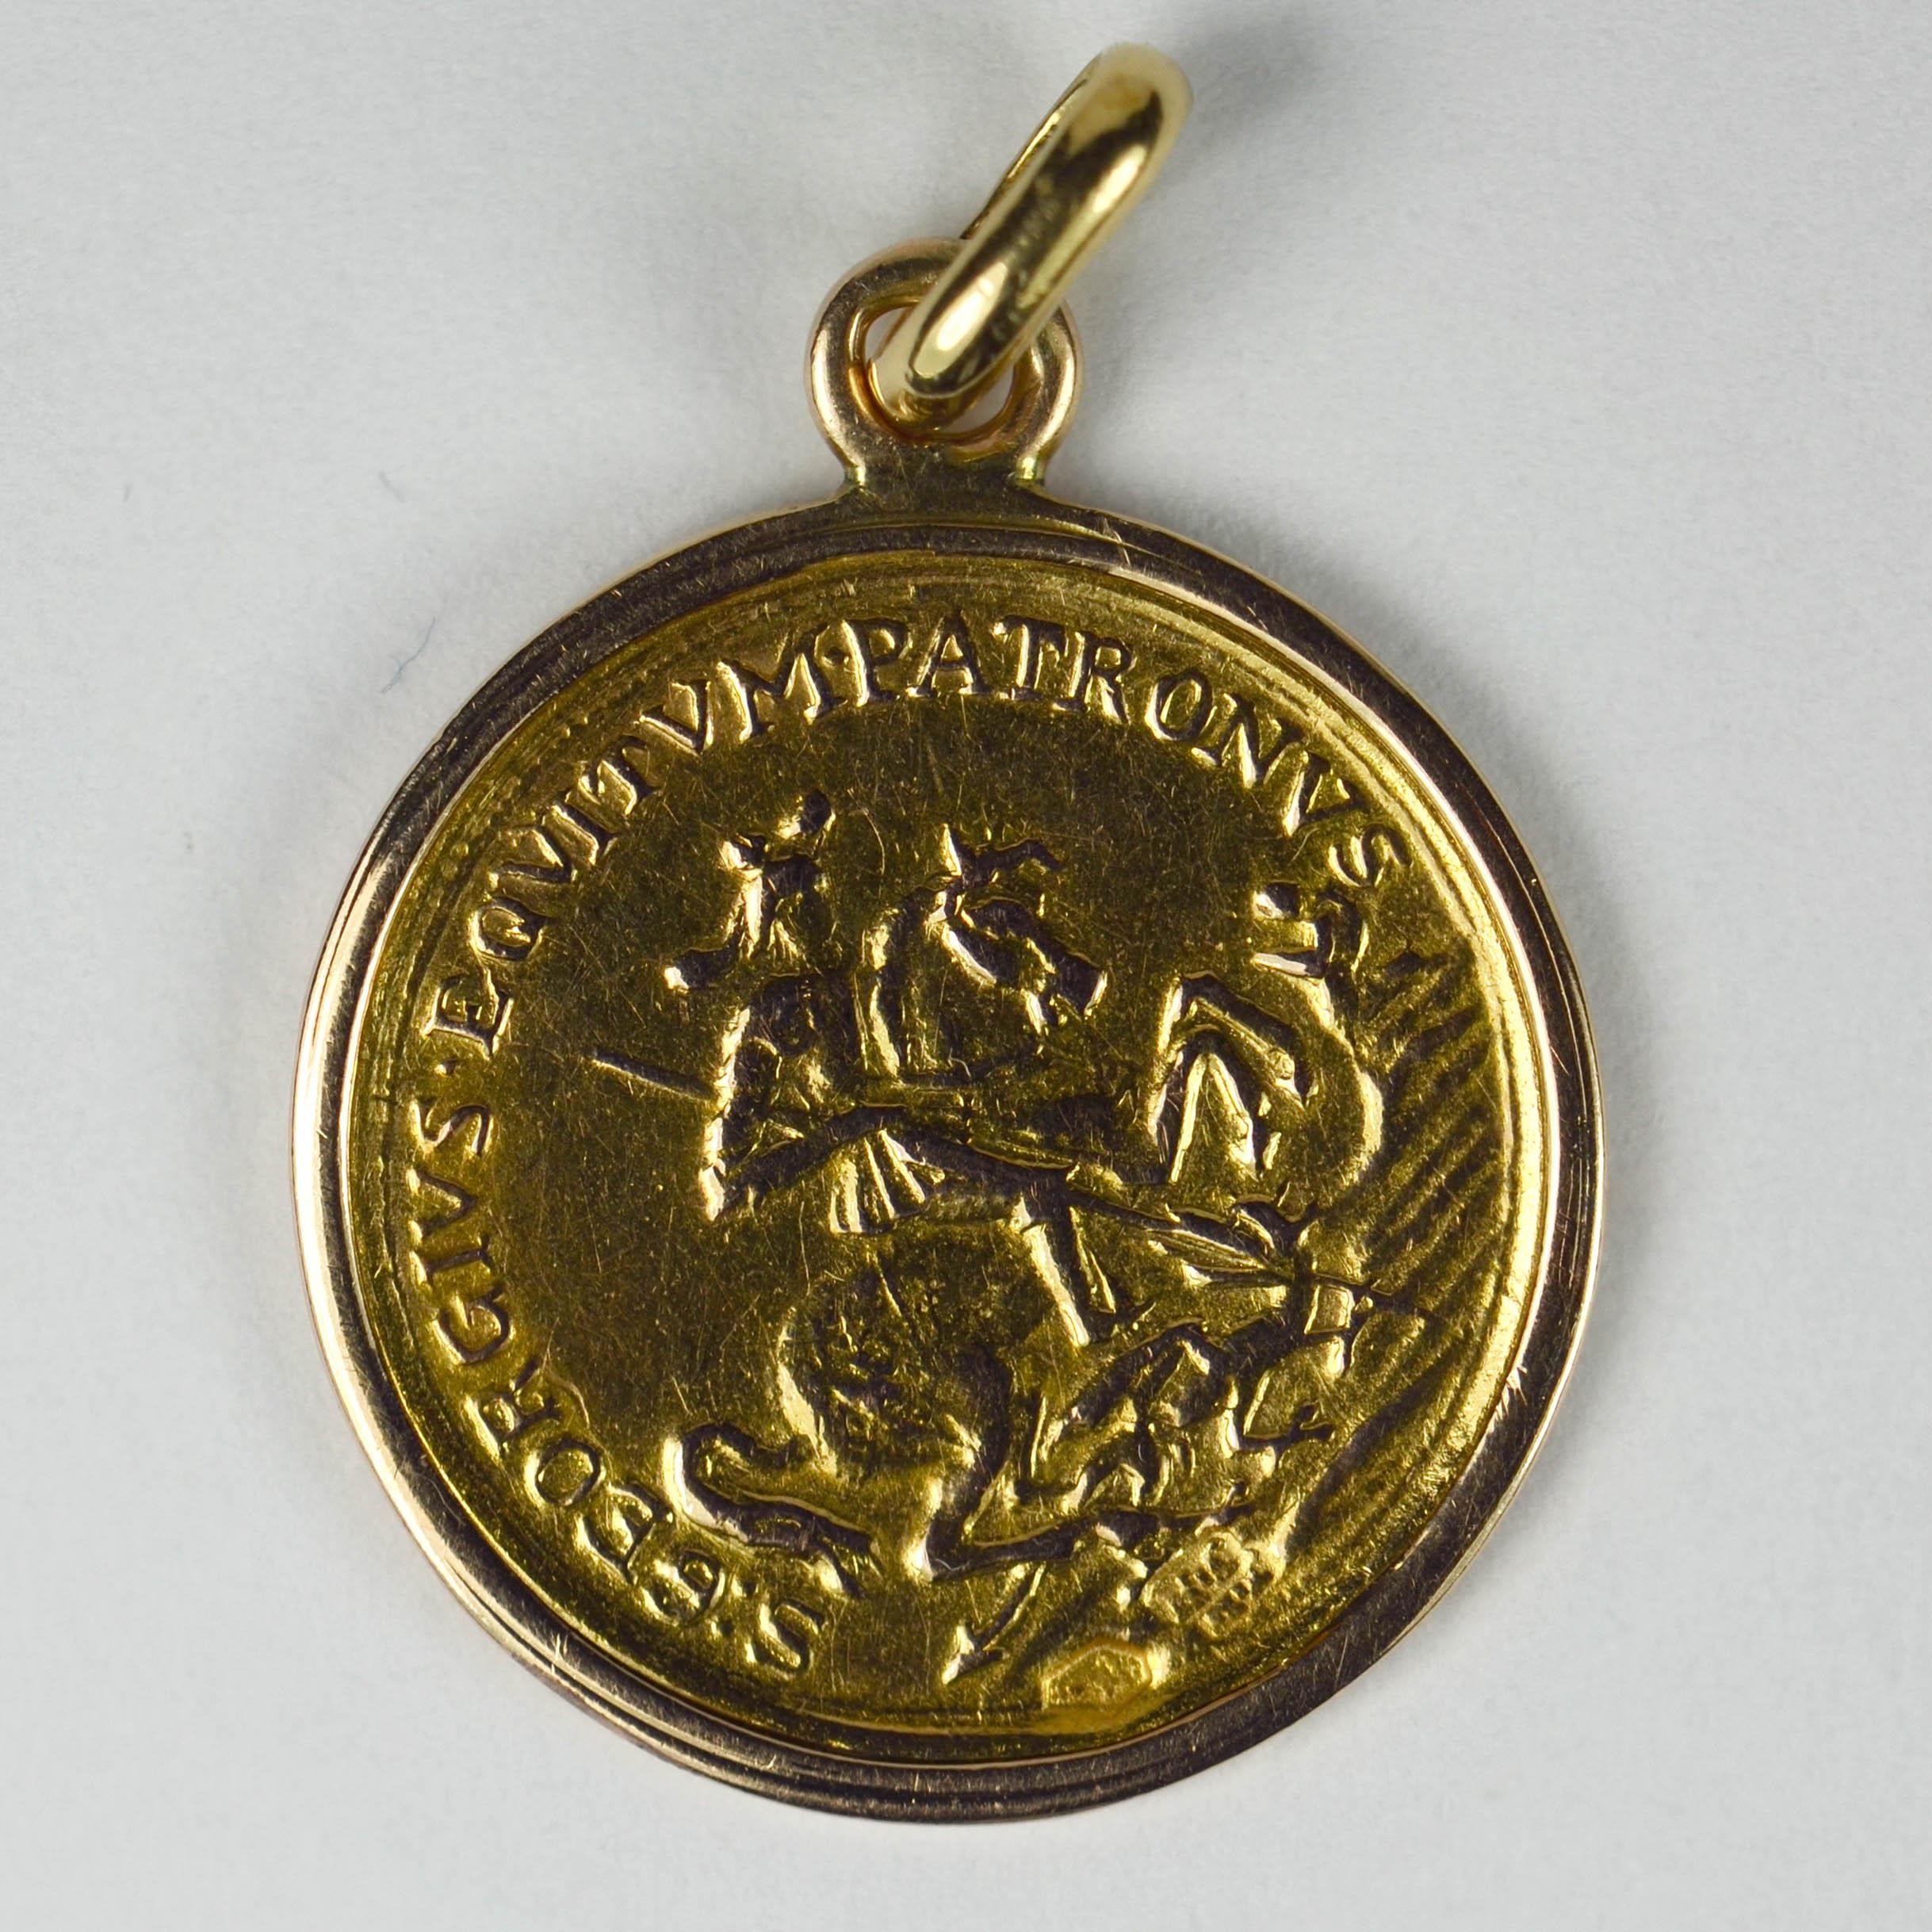 An 18 karat (18K) yellow gold charm pendant designed as an Austrian gold ducat set within a rose gold frame.

The coin depicts Saint George on a horse defeating the dragon with the words 'S. GEORGIUS EQUITUM PATRONUS' (St. George, Patron Saint of